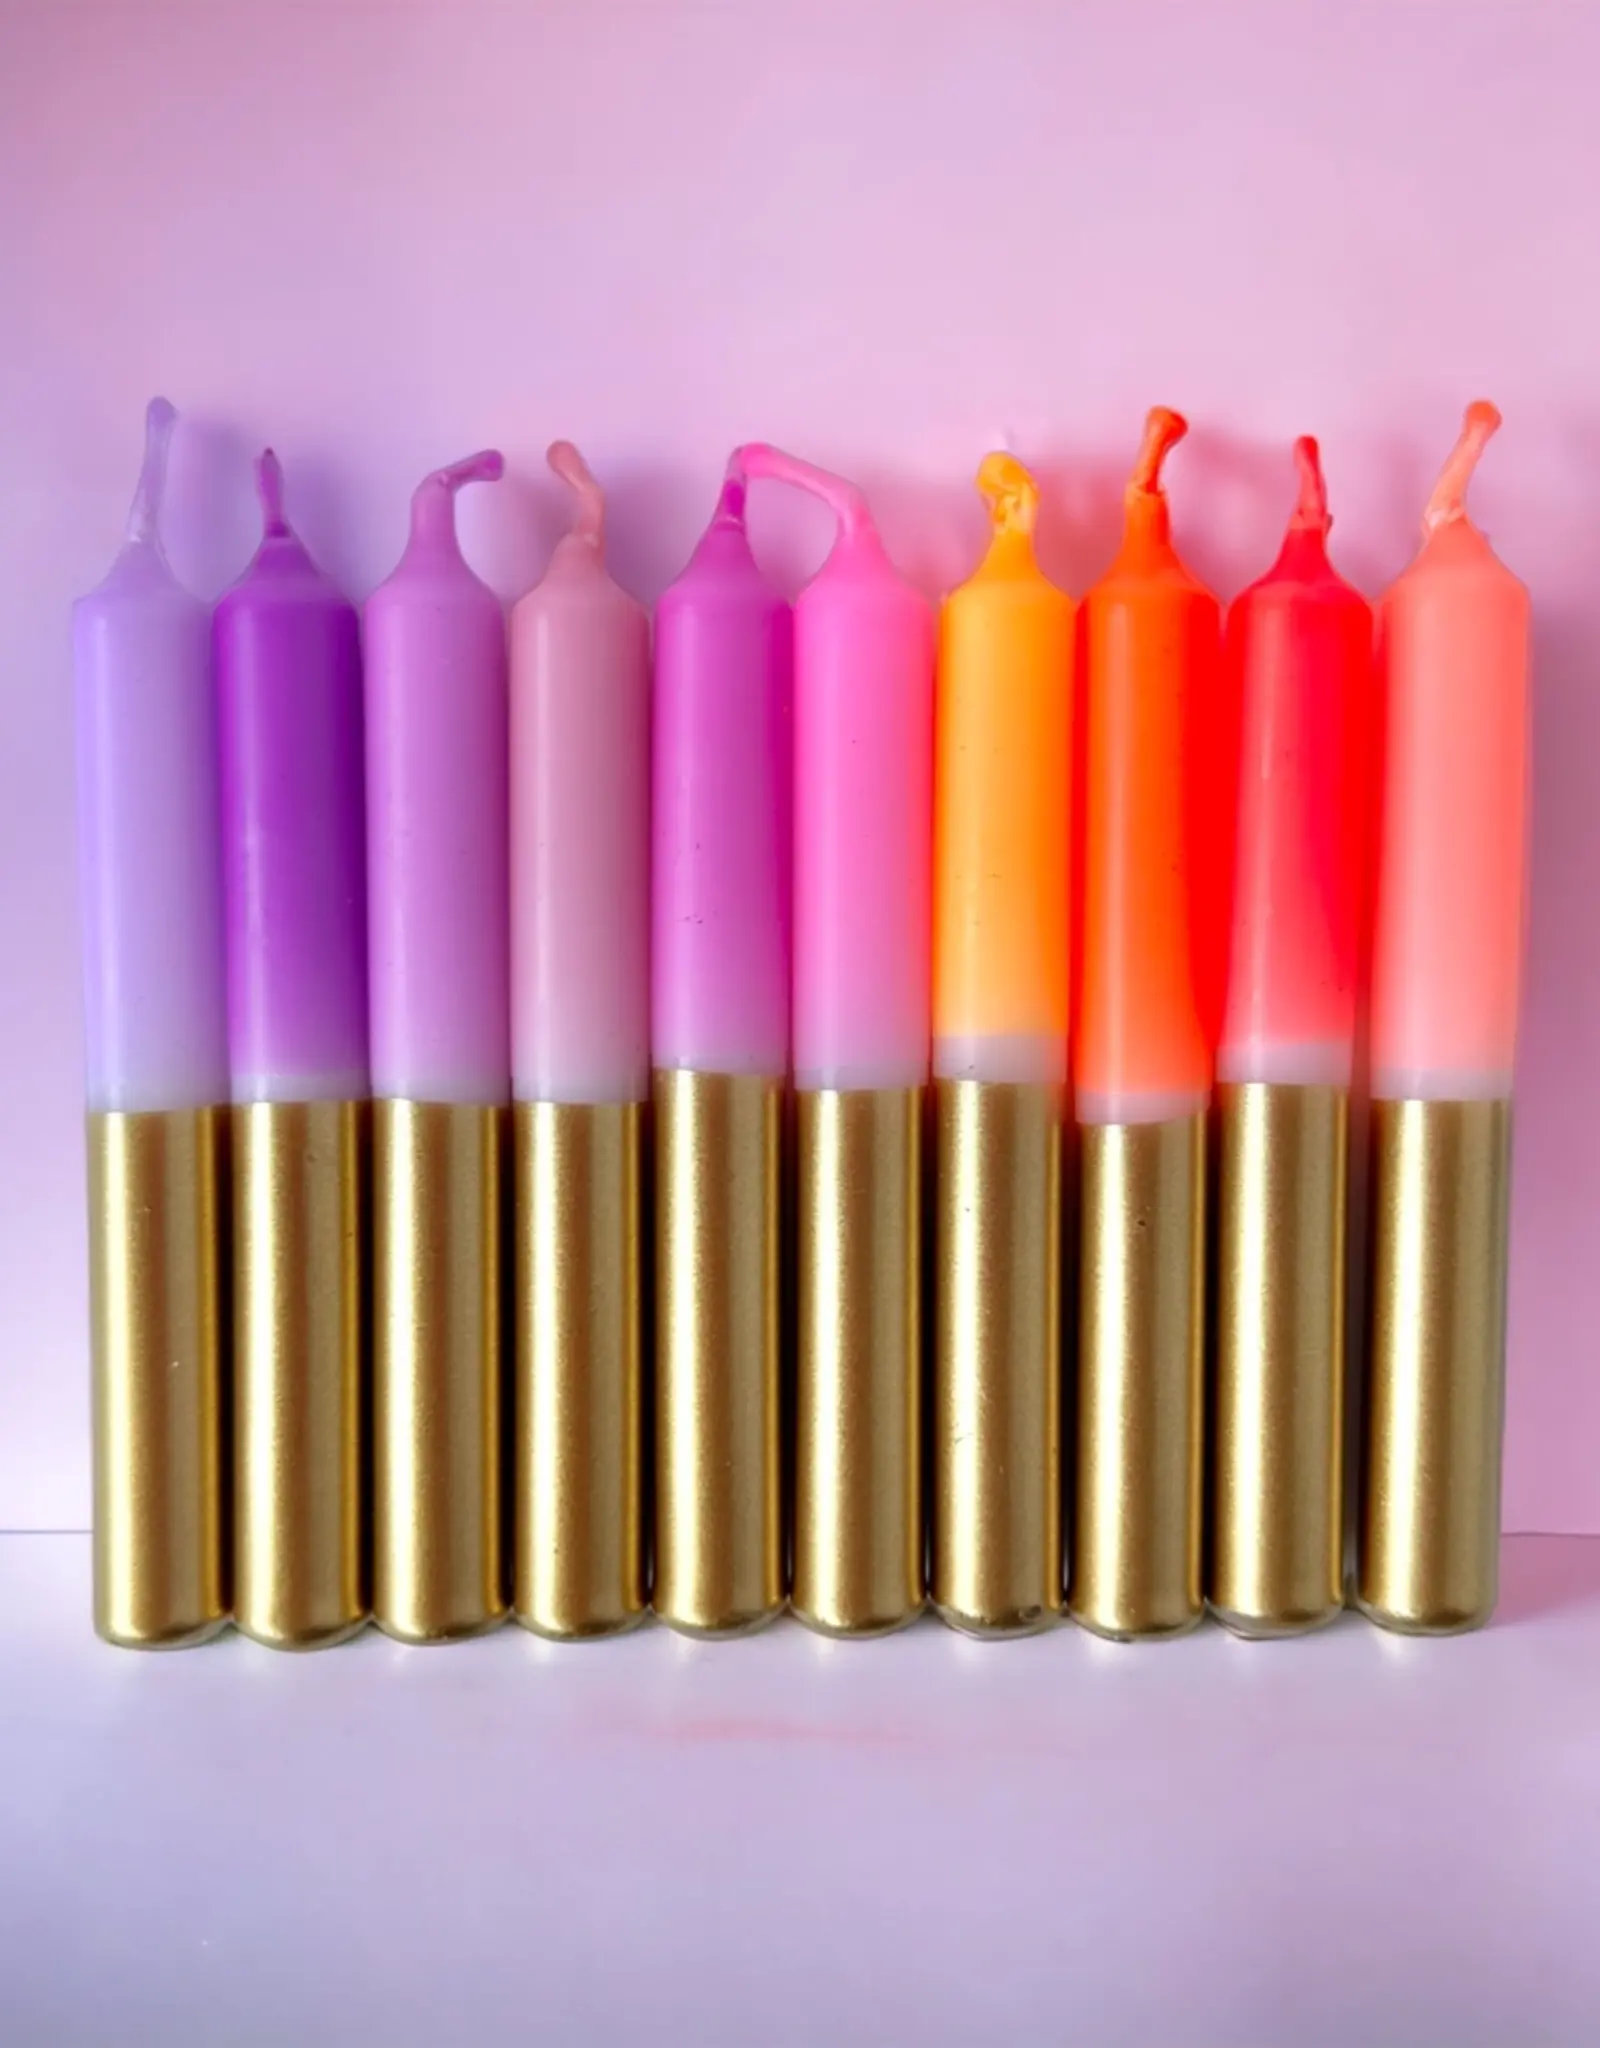 Pink Stories Tapered Candles - Dip Dye Little Star: Silent Stars